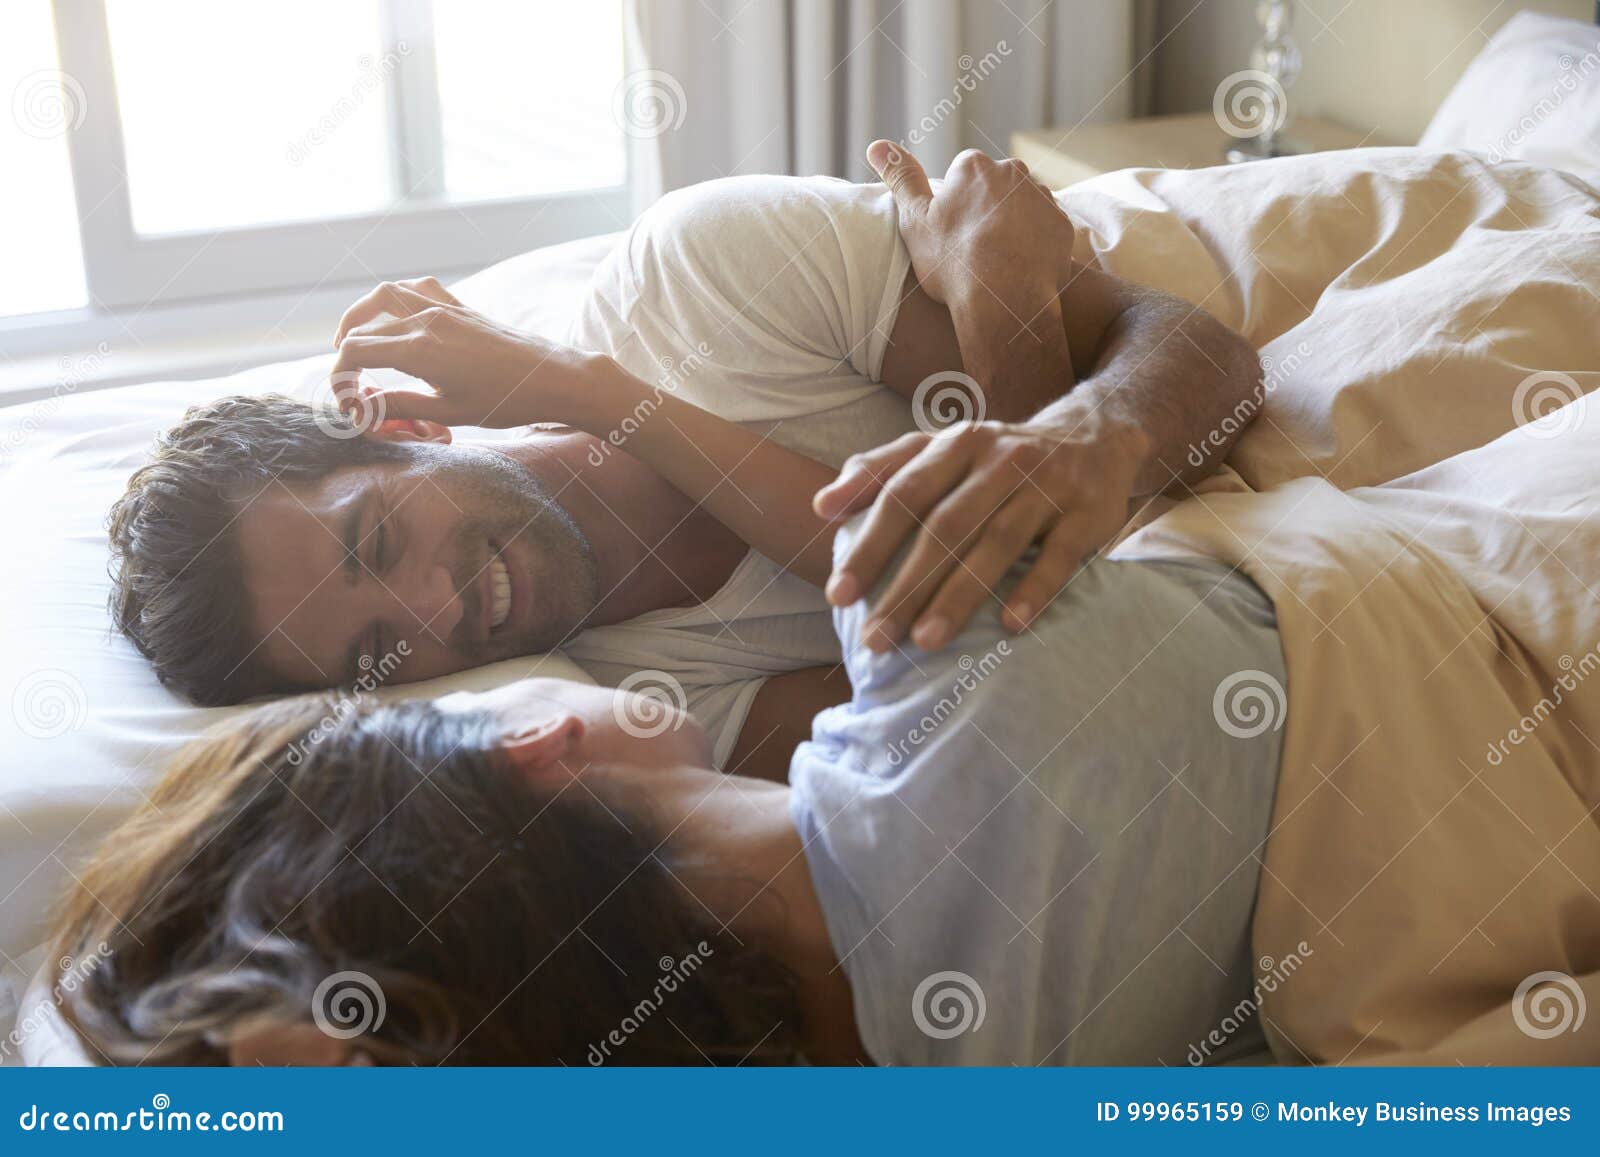 romantic couple lying in bed together